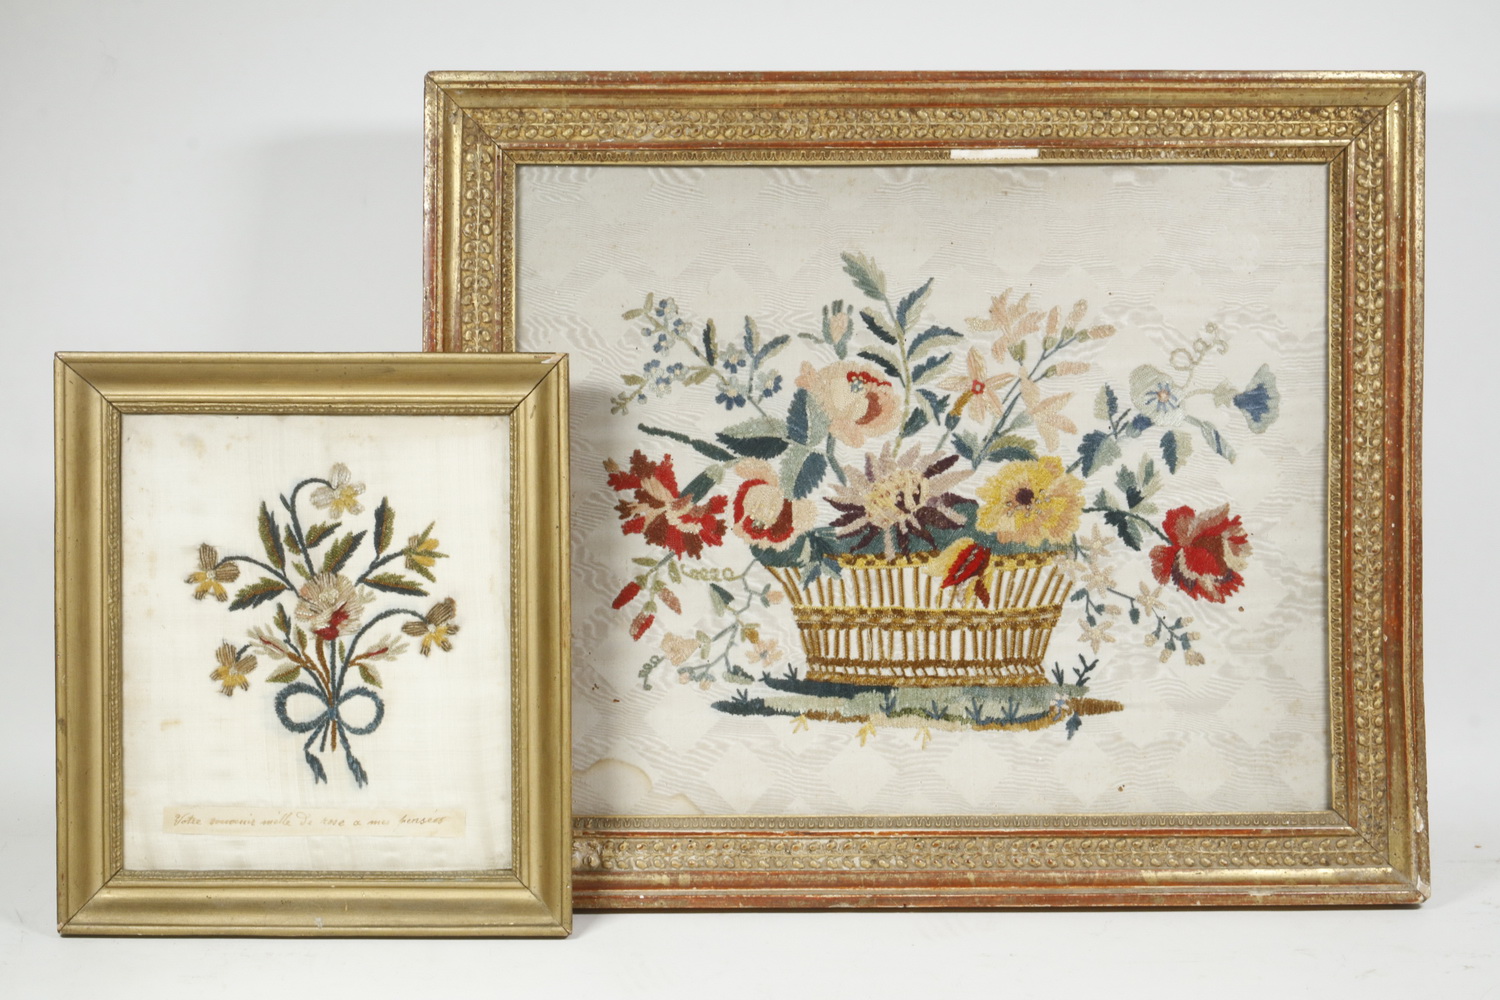  2 19TH C FRENCH FLORAL NEEDLEWORK 2b22fa